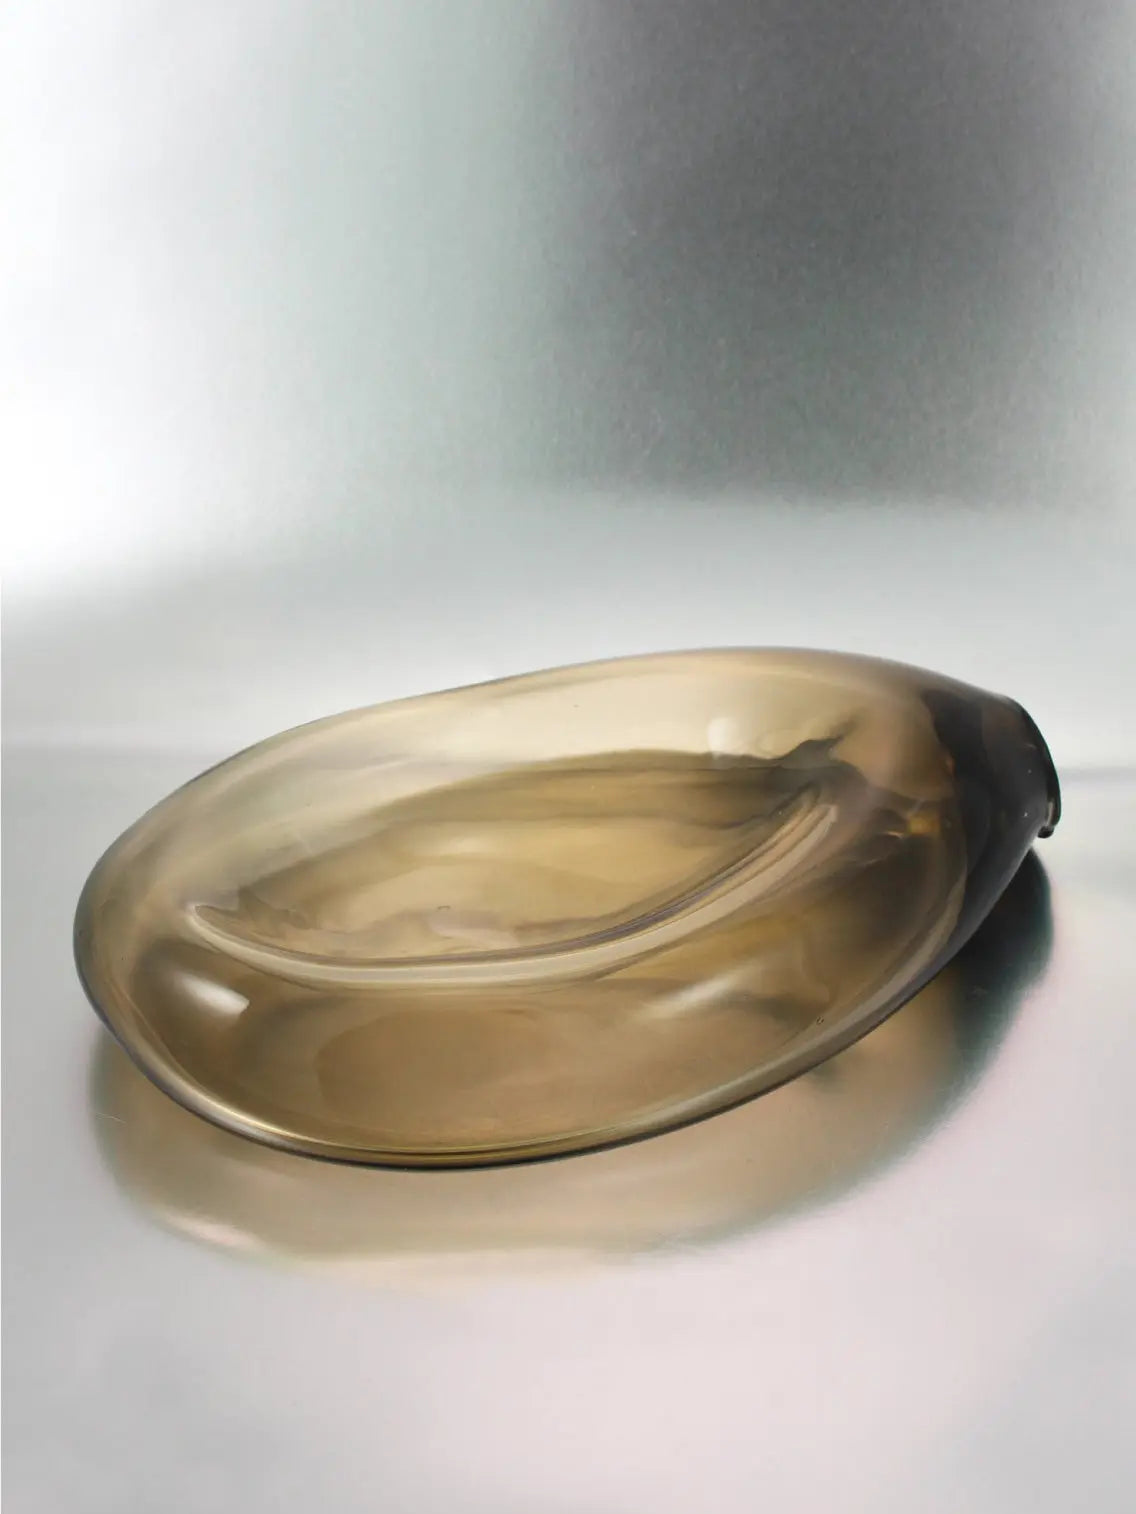 An elongated, translucent, brownish glass Gil Plate Olive by Nathalie Schreckenberg sits on a reflective surface. Available at Bassalstore in Barcelona, its shape is smooth and slightly asymmetrical, giving it a modern yet organic appearance. The gradient of the color intensifies toward one end of the plate.